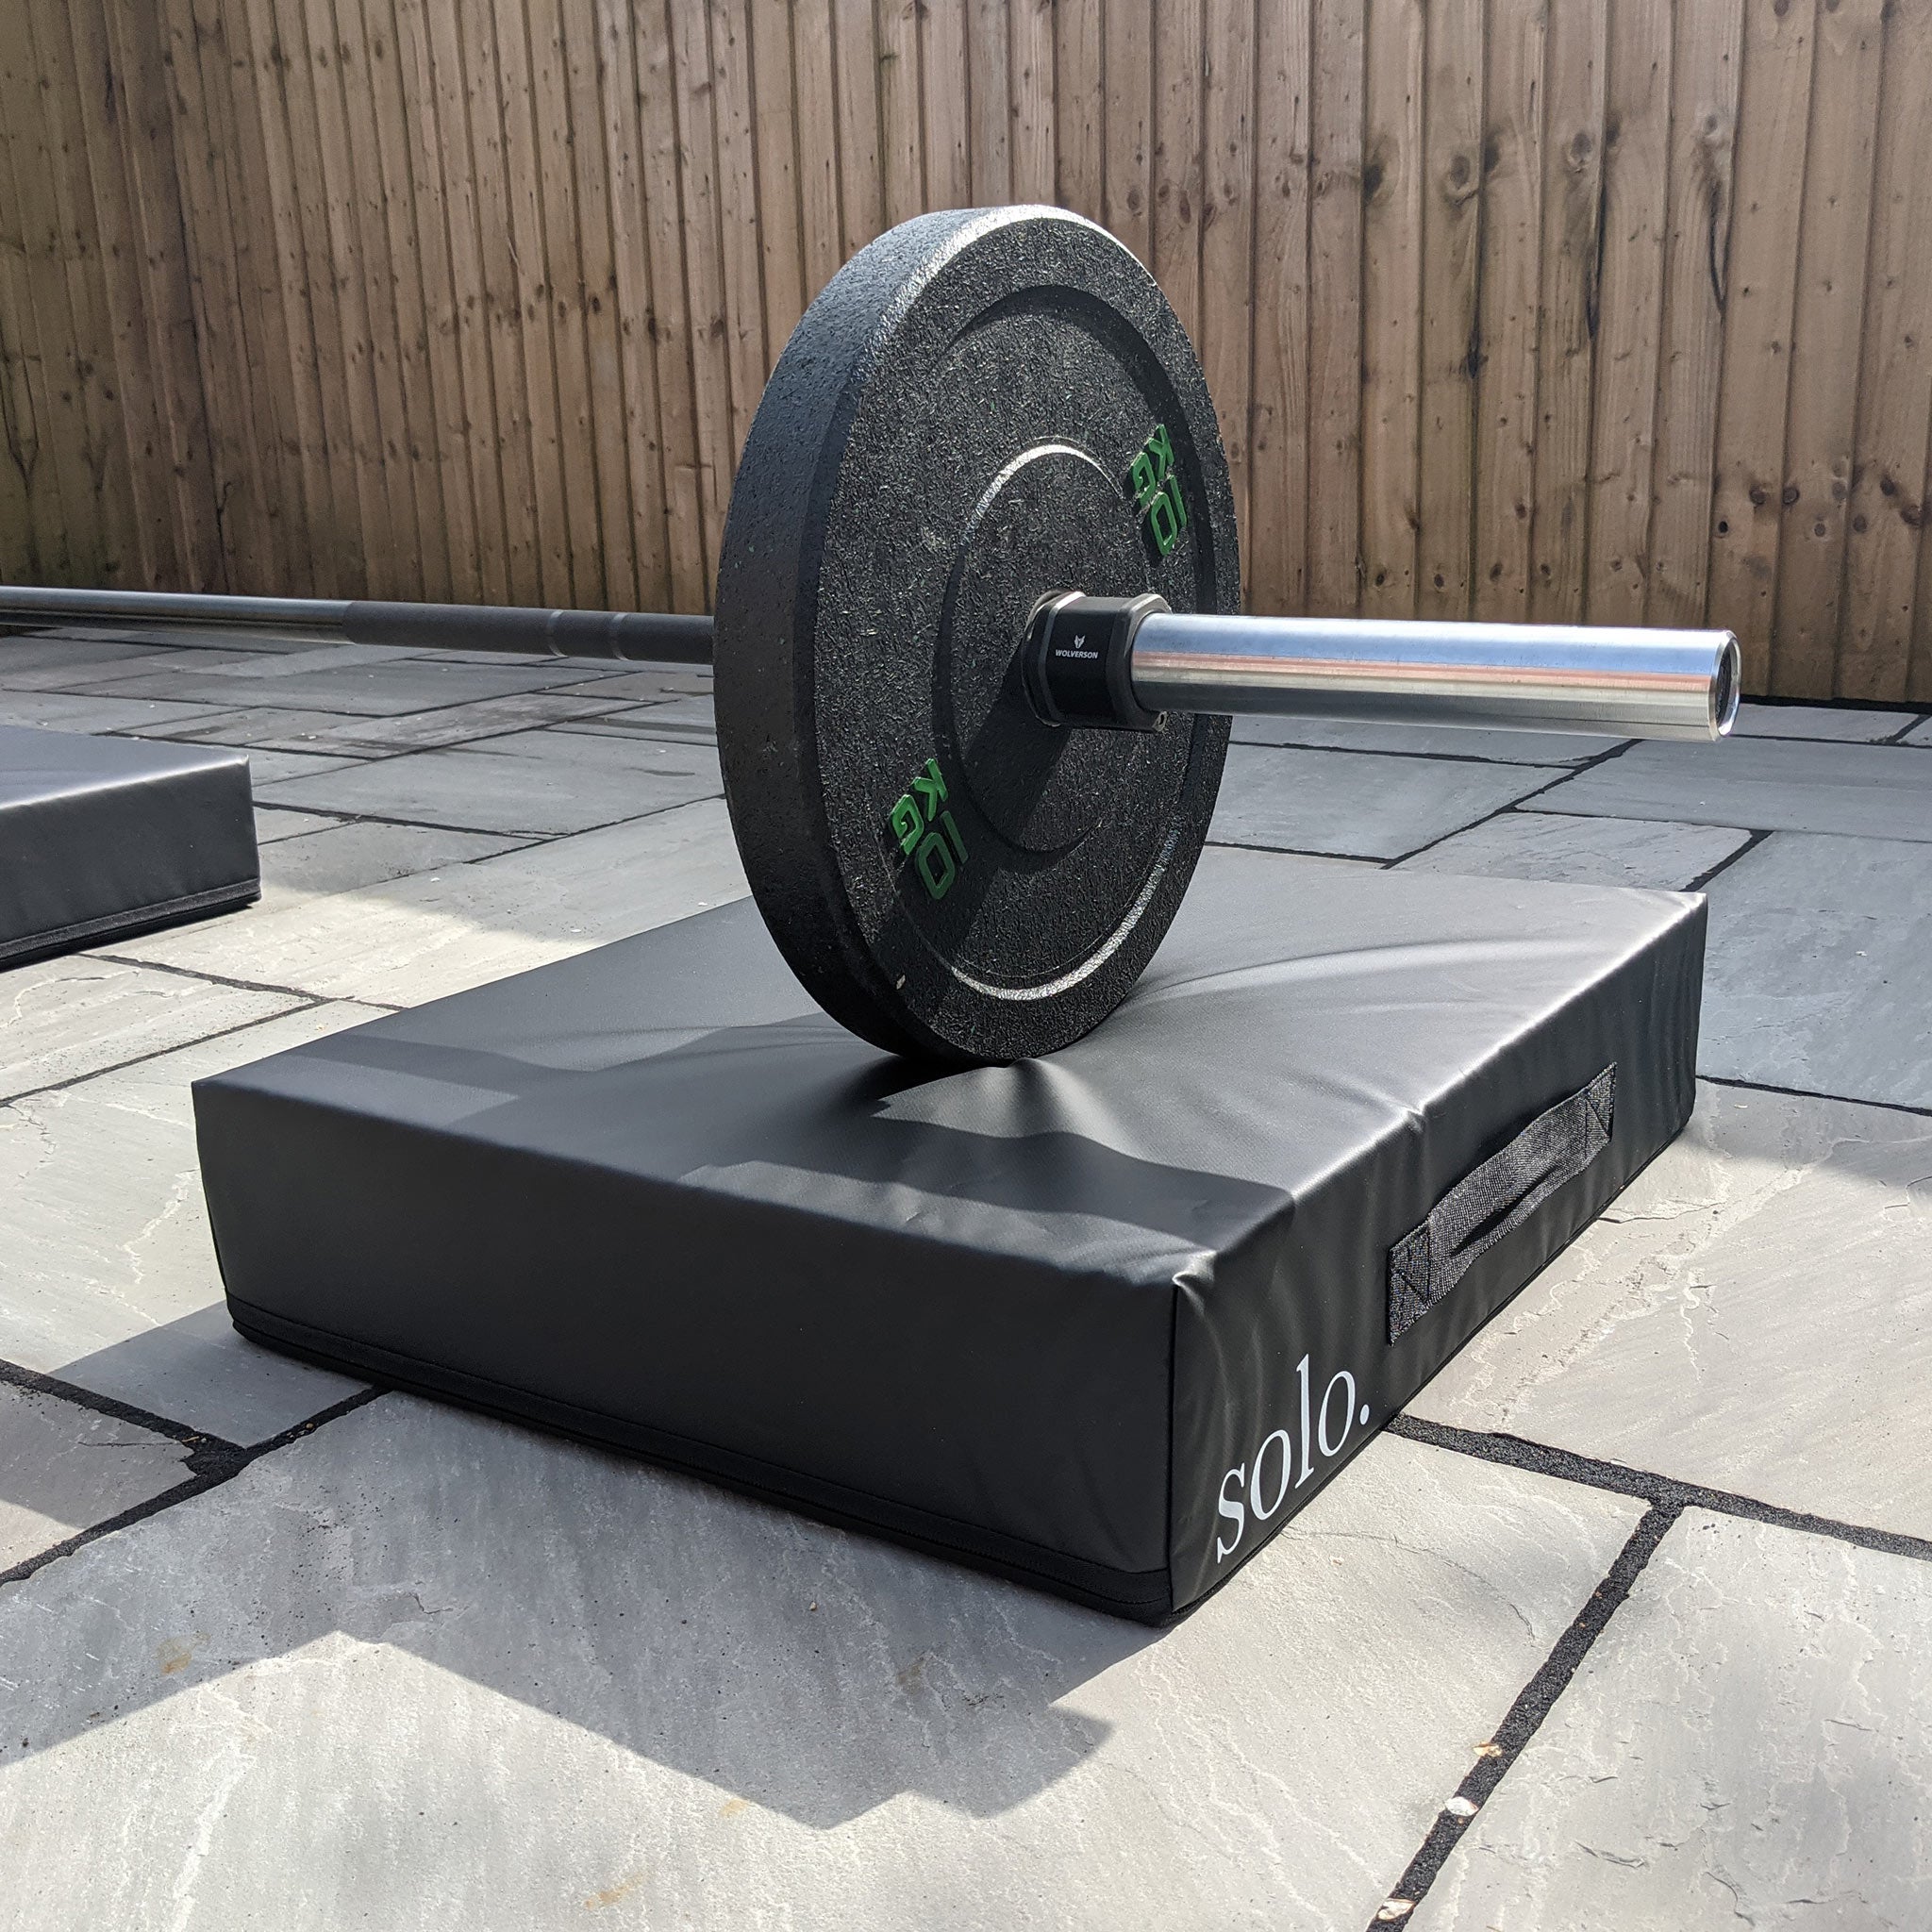 Weightlifting and Deadlift Drop Pads